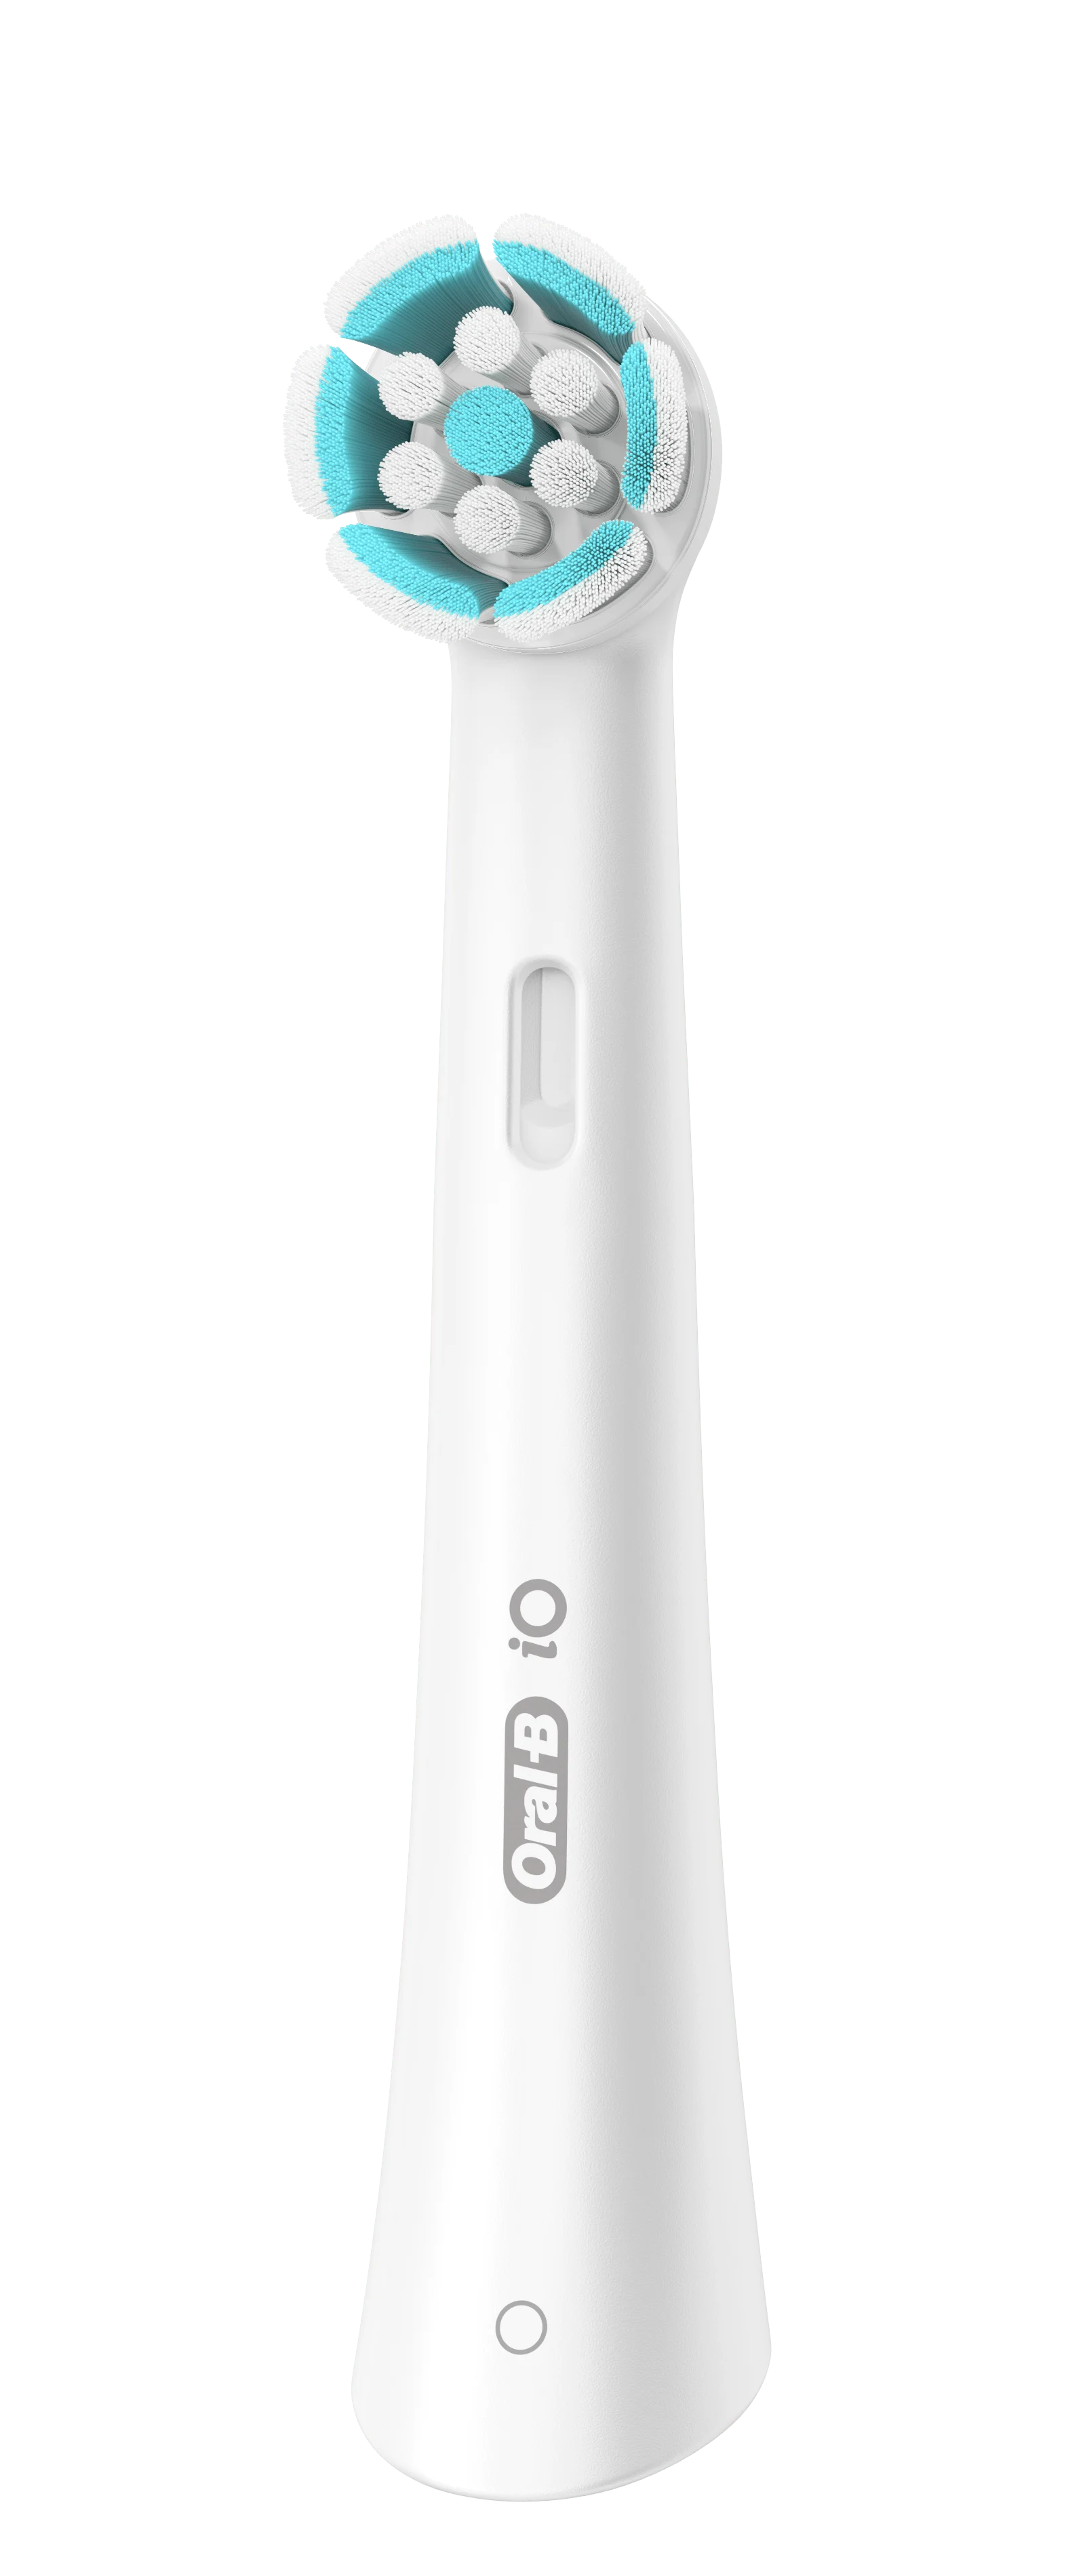 Oral-b iO gentle care 1st frame